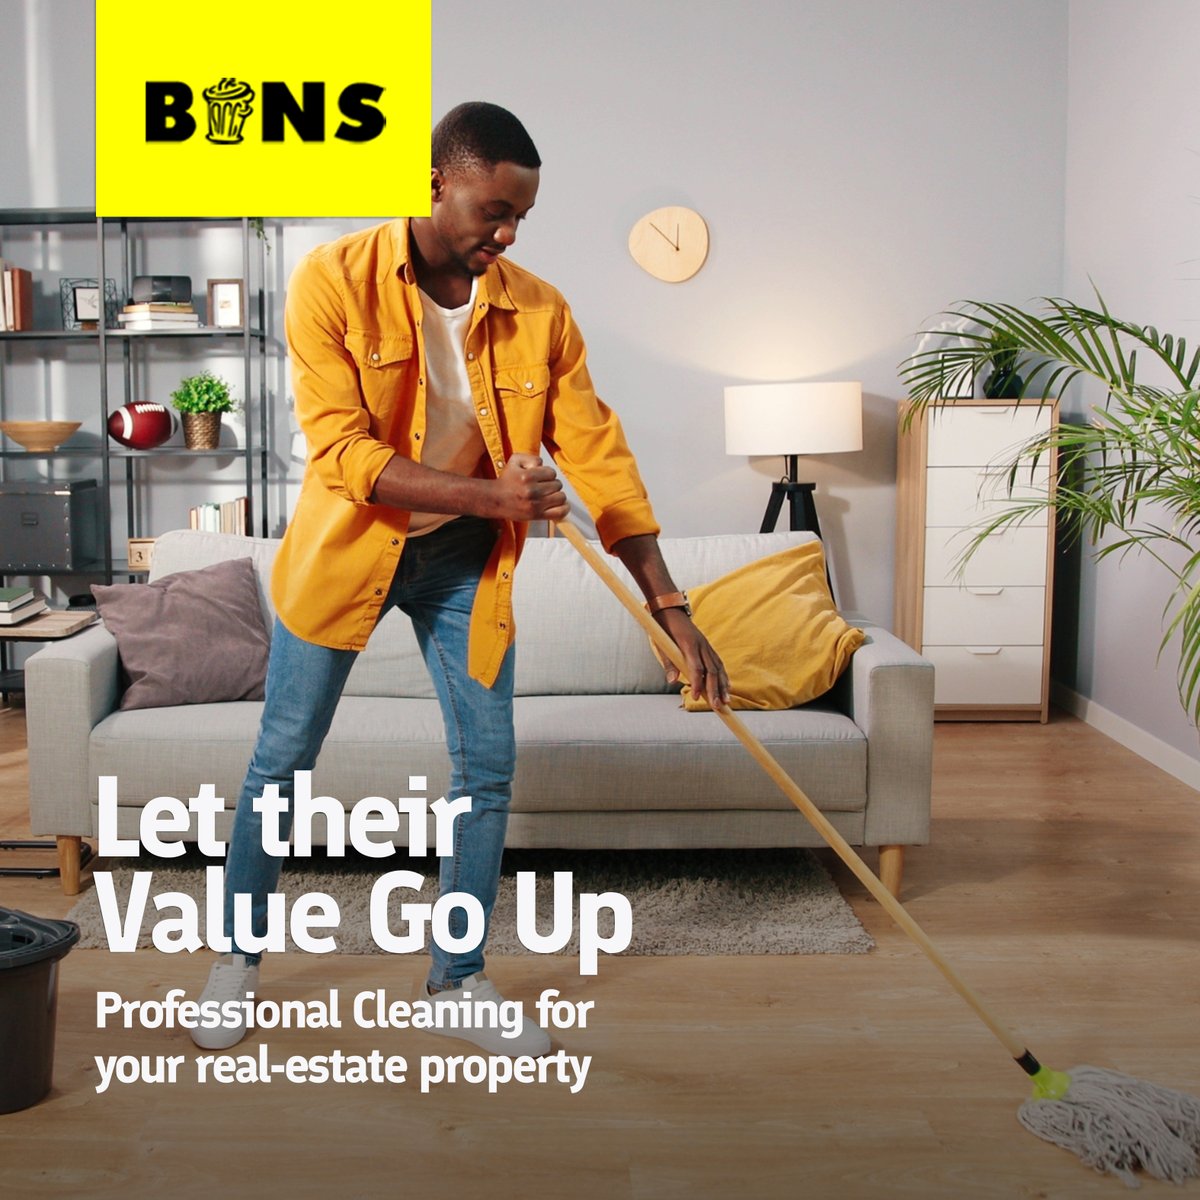 With our professional cleaning services, you can create an inviting environment that entices buyers and maximises the value of your real estate listings. #Realestatecleaning #BinsKampala #ProfessionalCleaningServices